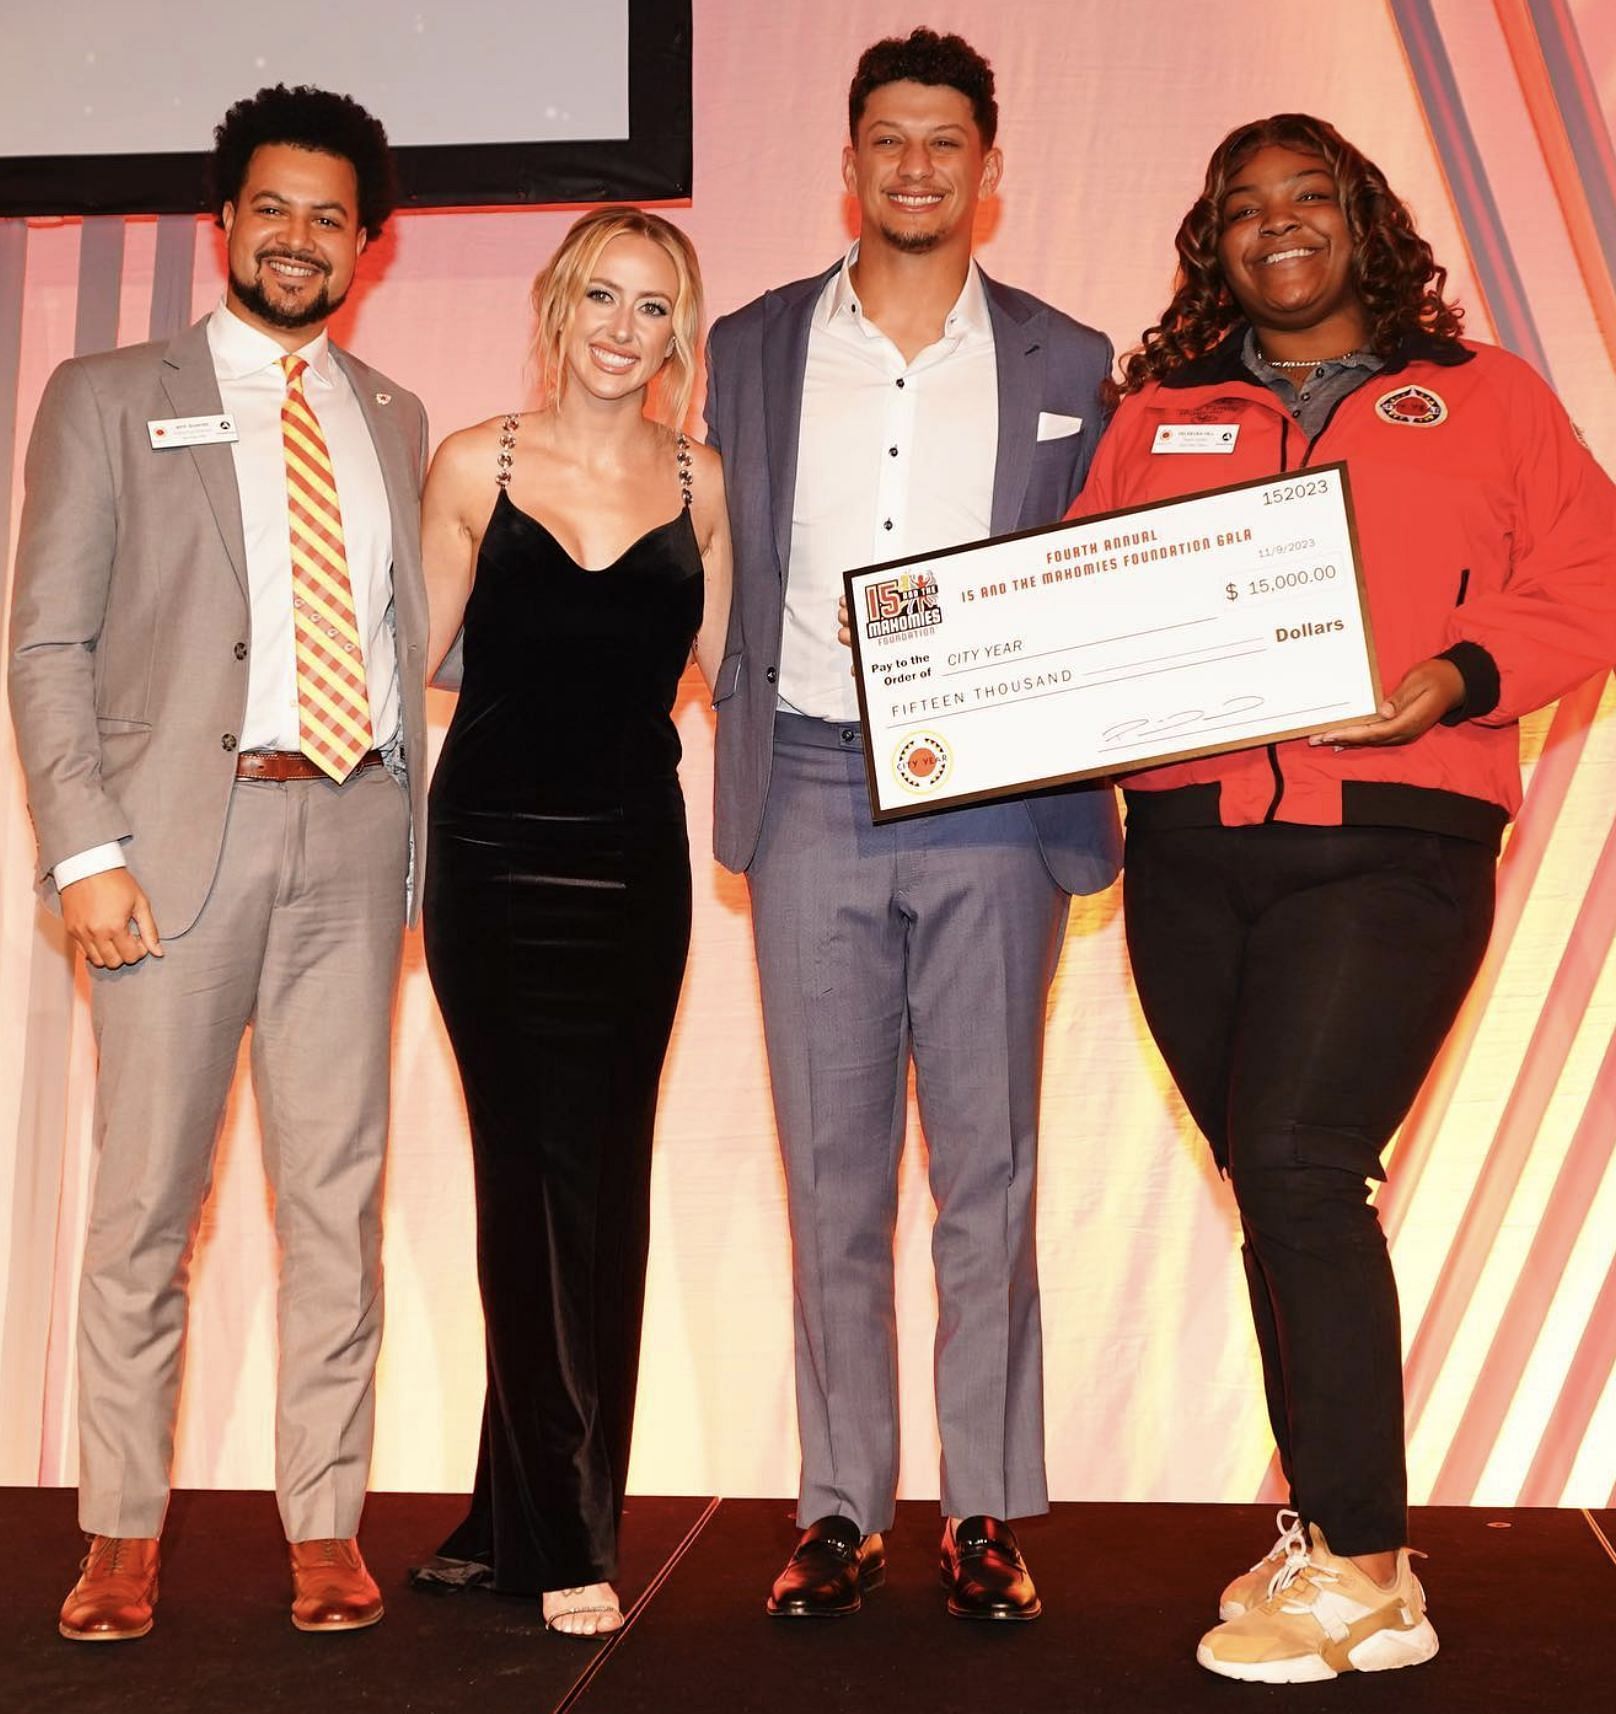 A $15K donation to City Year Credit: 15 and Mahomes (IG)